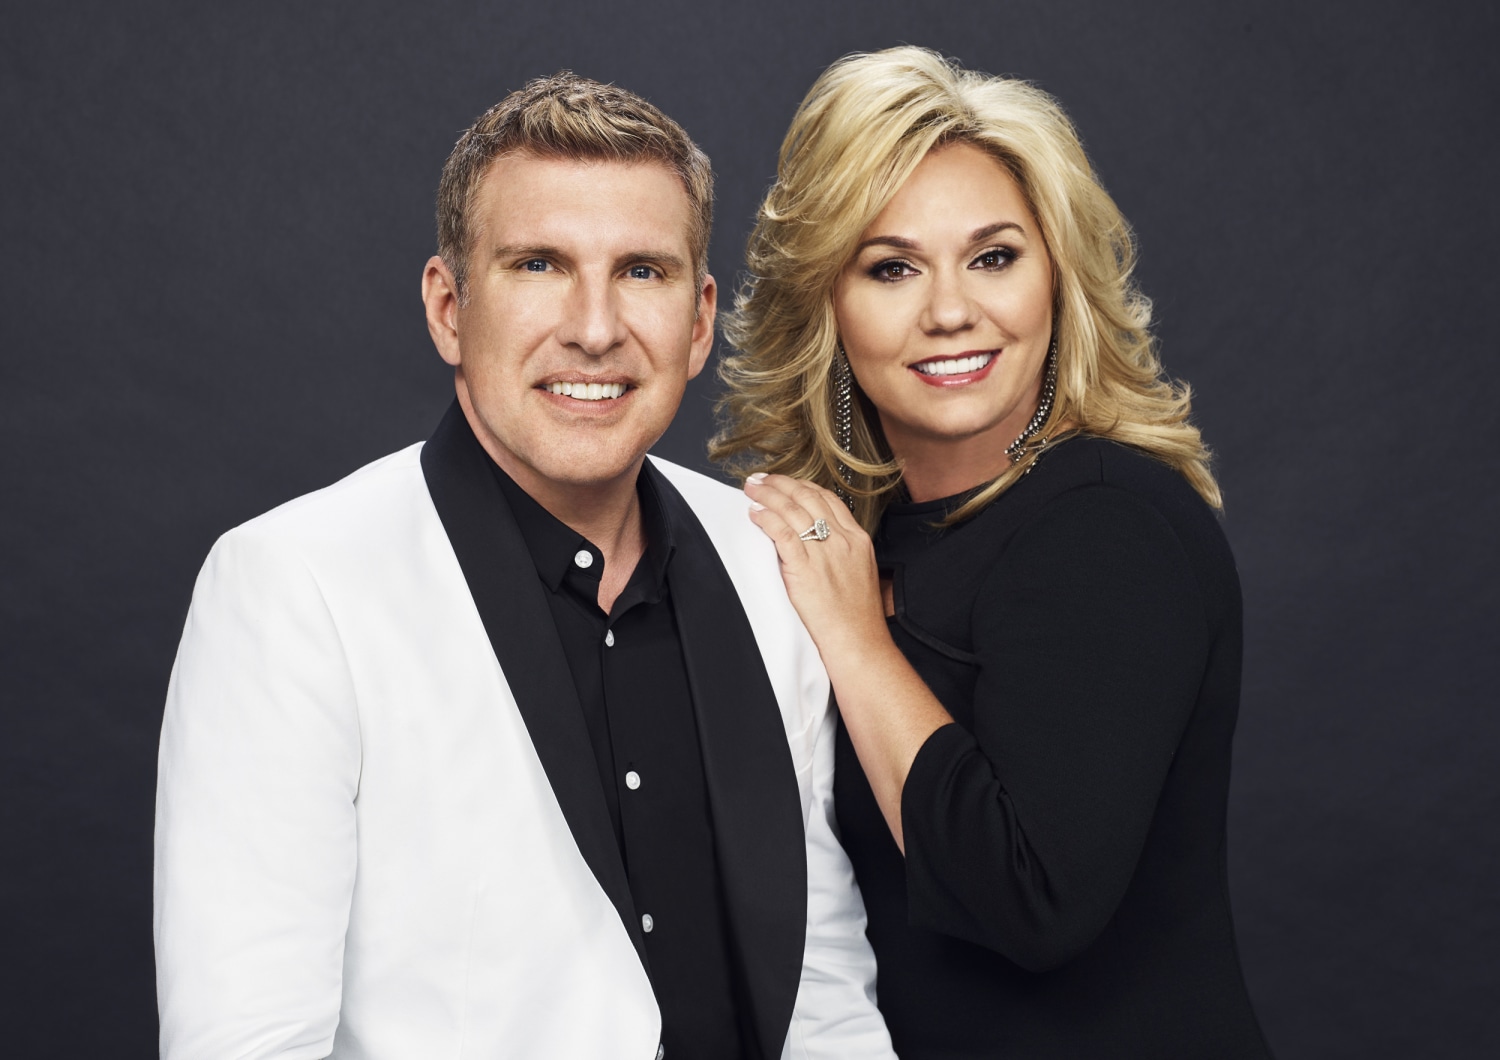 Reality TV star Todd Chrisley indicted on tax evasion and other charges